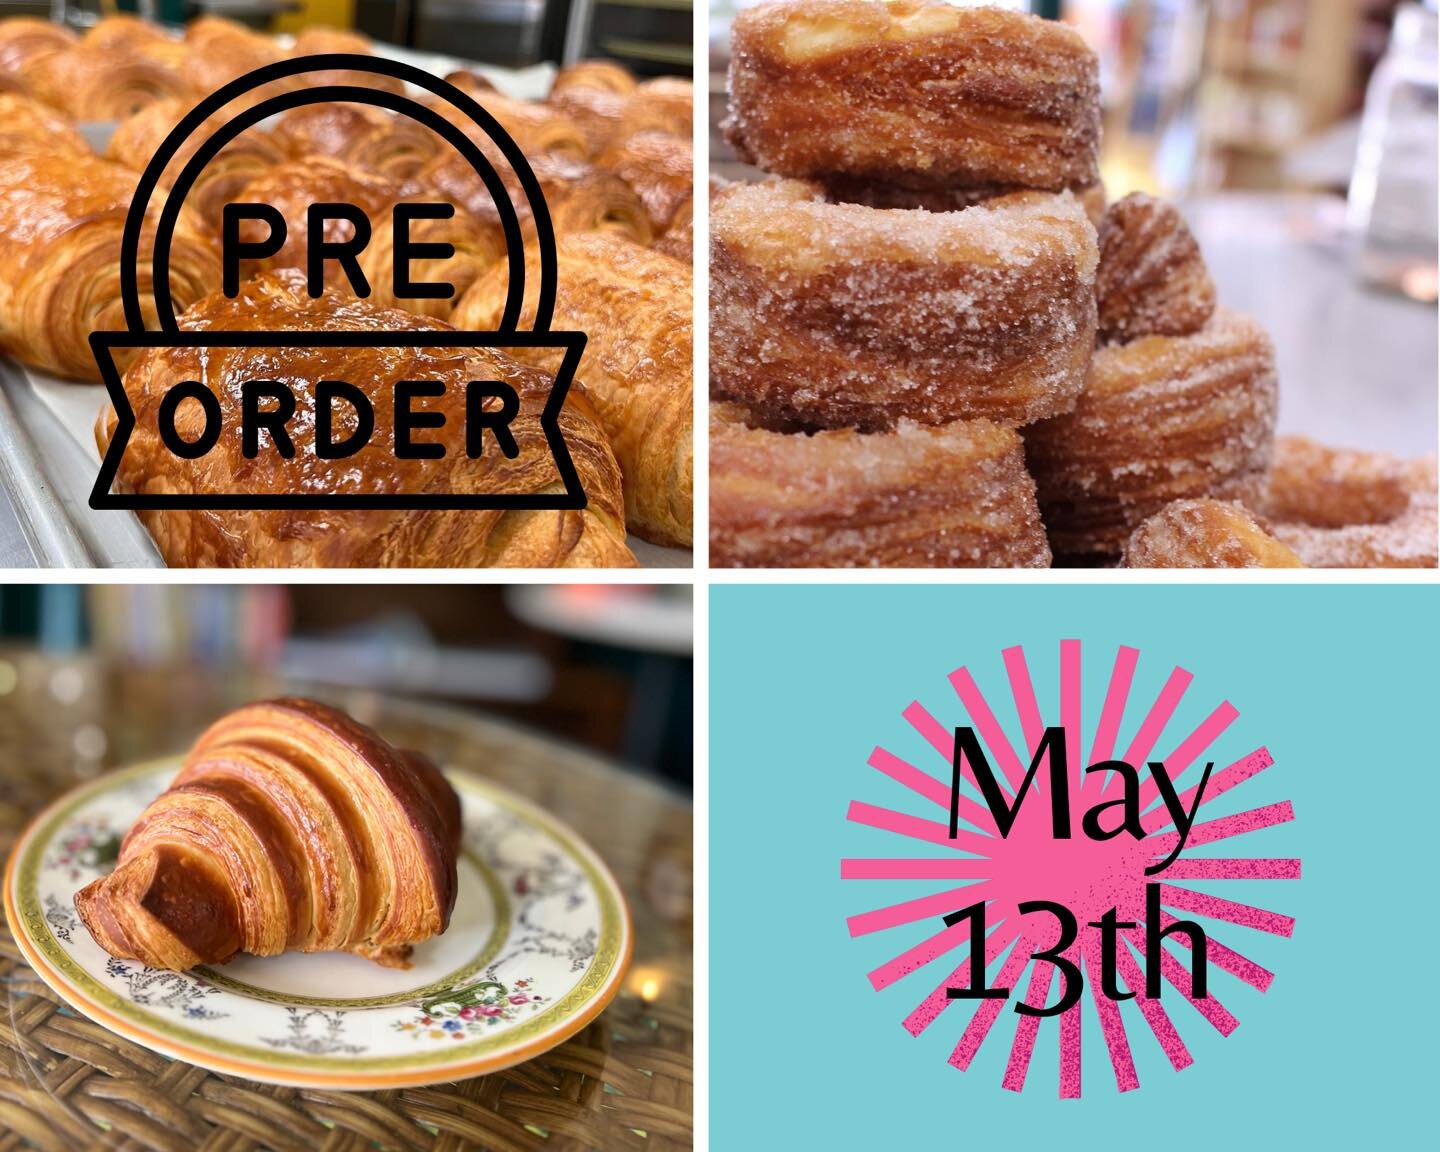 Ok! Per your request, we&rsquo;ve got the link for pre-orders up for this Saturday&rsquo;s Butter Croissants, Chocolate Croissants &amp; Cronuts! 

https://storyboarddelights.com/shop/pre-order-pastries 

Side note: we&rsquo;re planning on bringing b